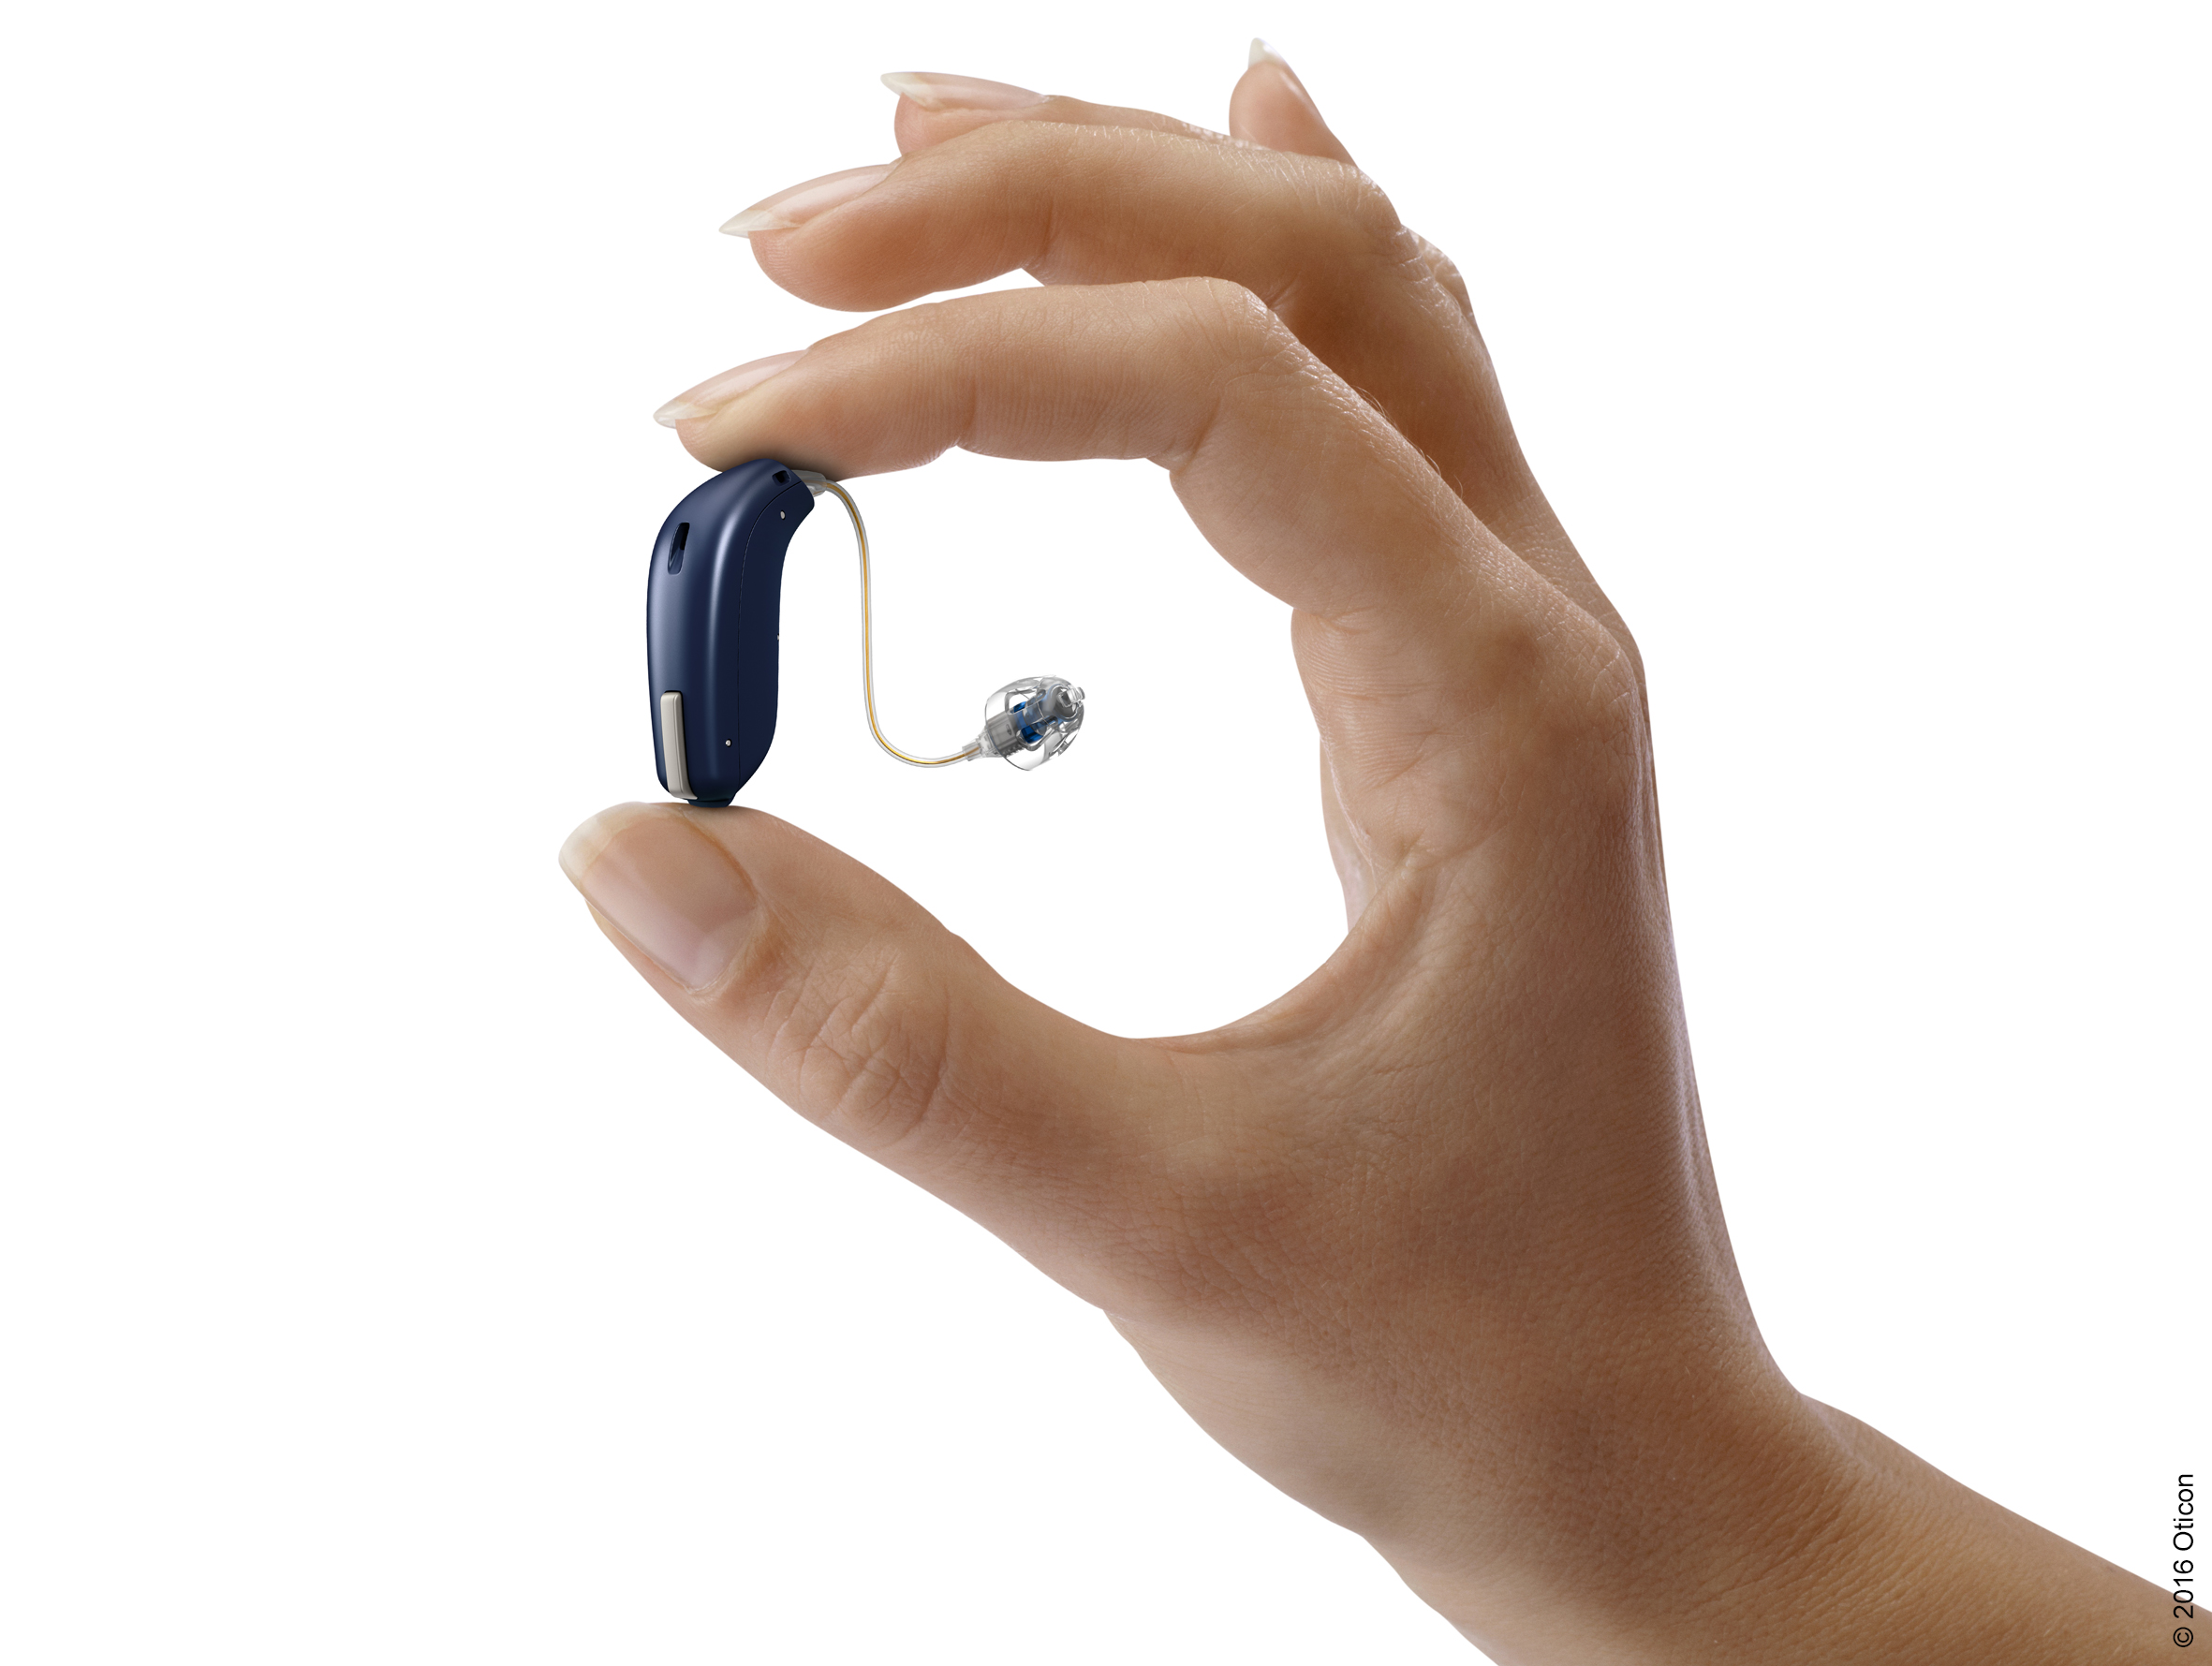 Oticon uses Universal Robots machine to manipulate tiny little components inside hearing aid